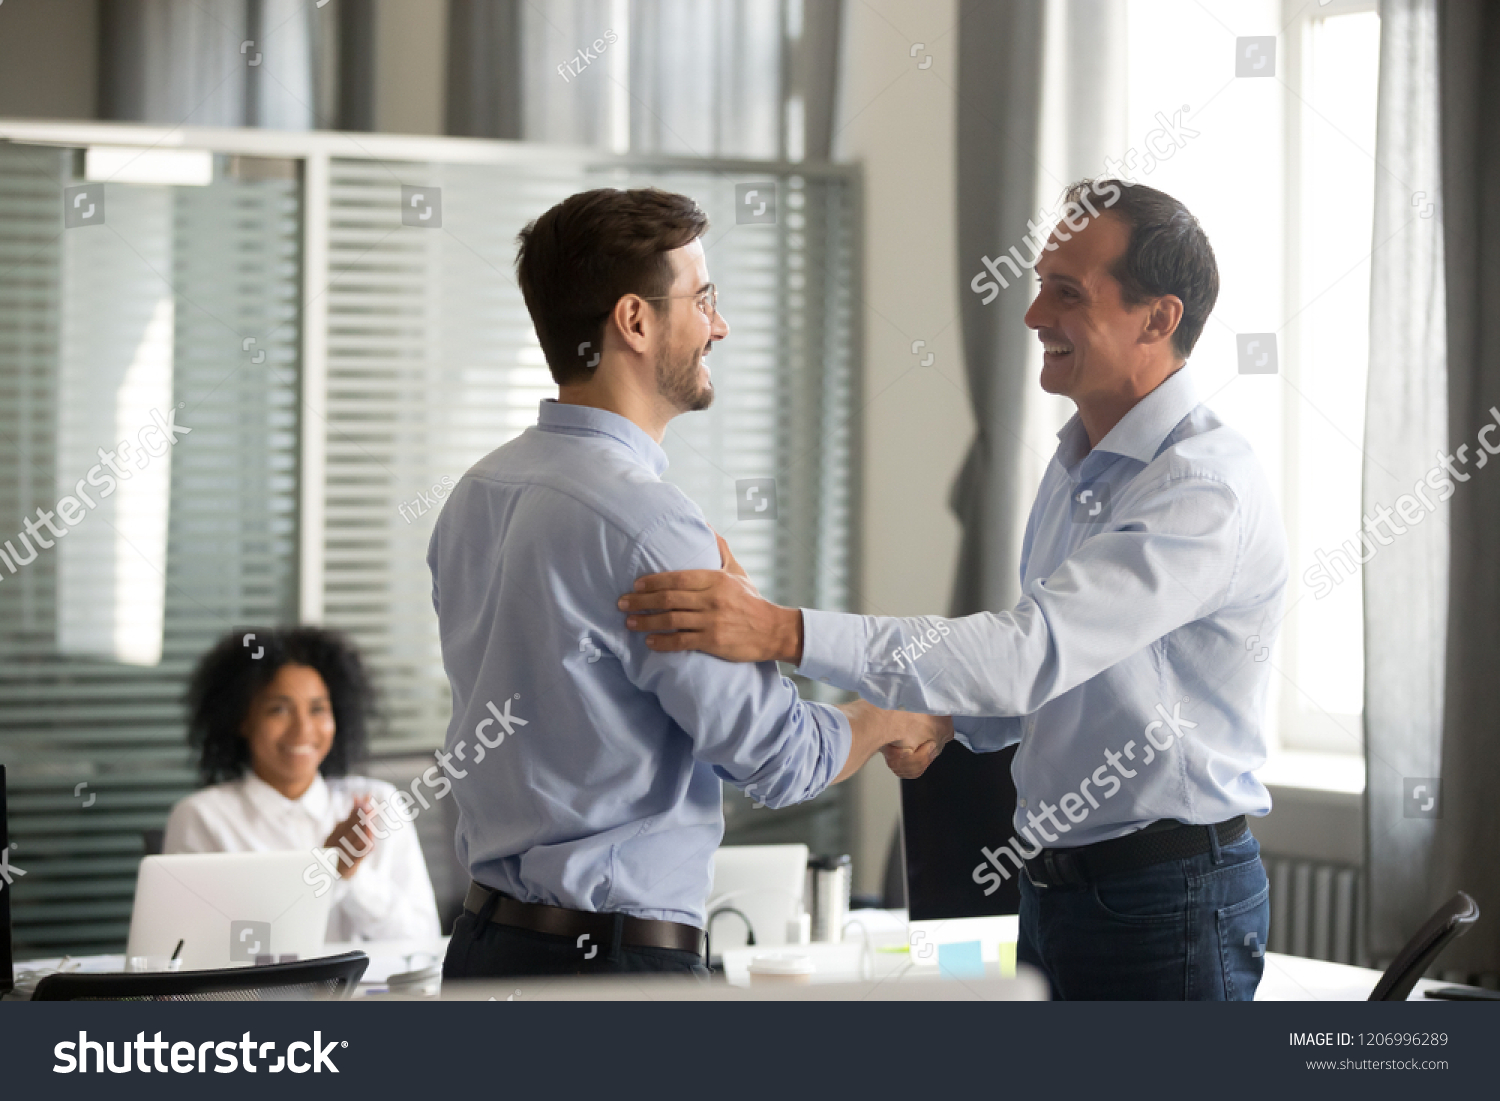 Smiling middle-aged ceo promoting motivating worker shaking hands congratulating with achievement promising respect bonus thanking for good work, team applauding, employee reward recognition concept #1206996289